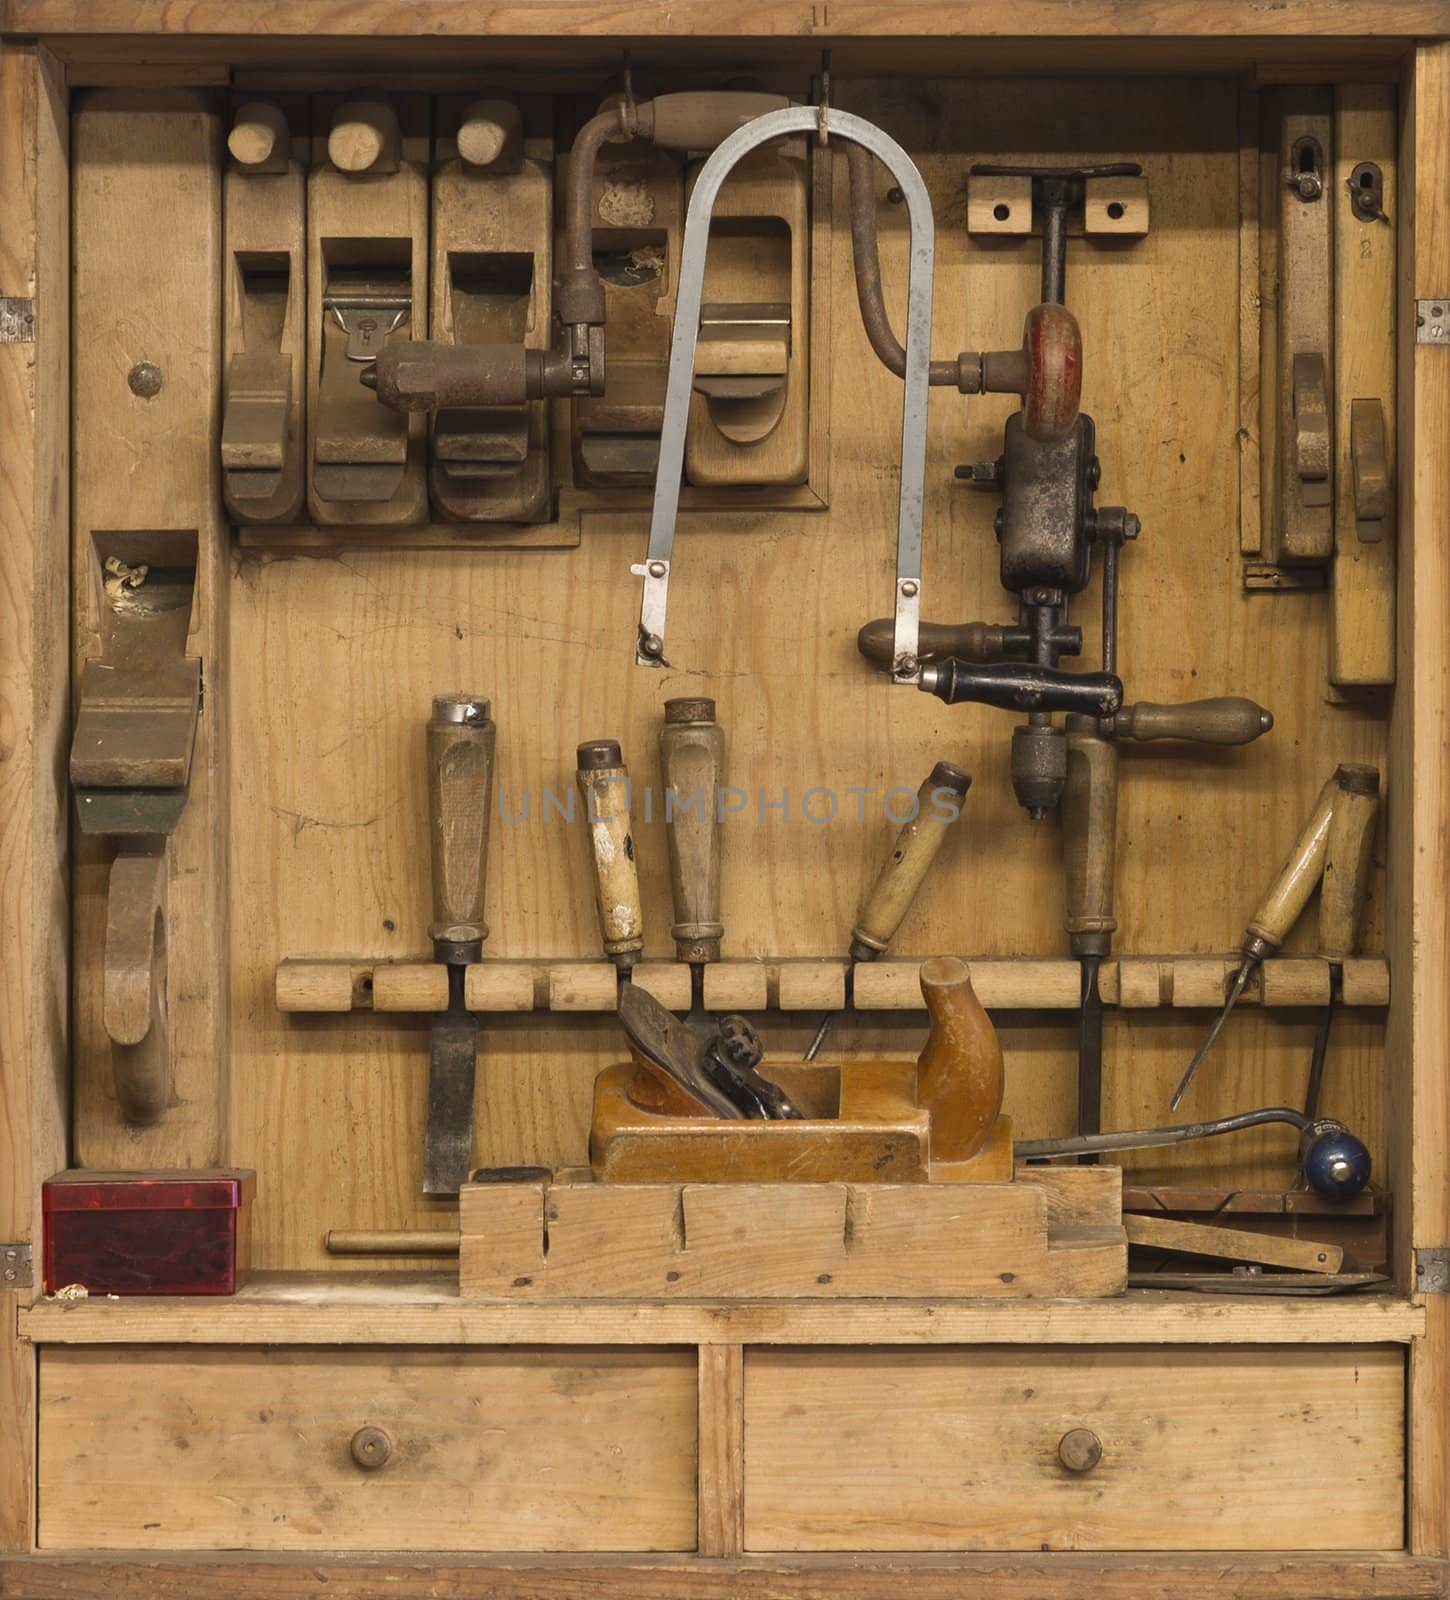 carpenters tools in a wooden cabinet. There are many tools like a planer, chisel, saw, drill